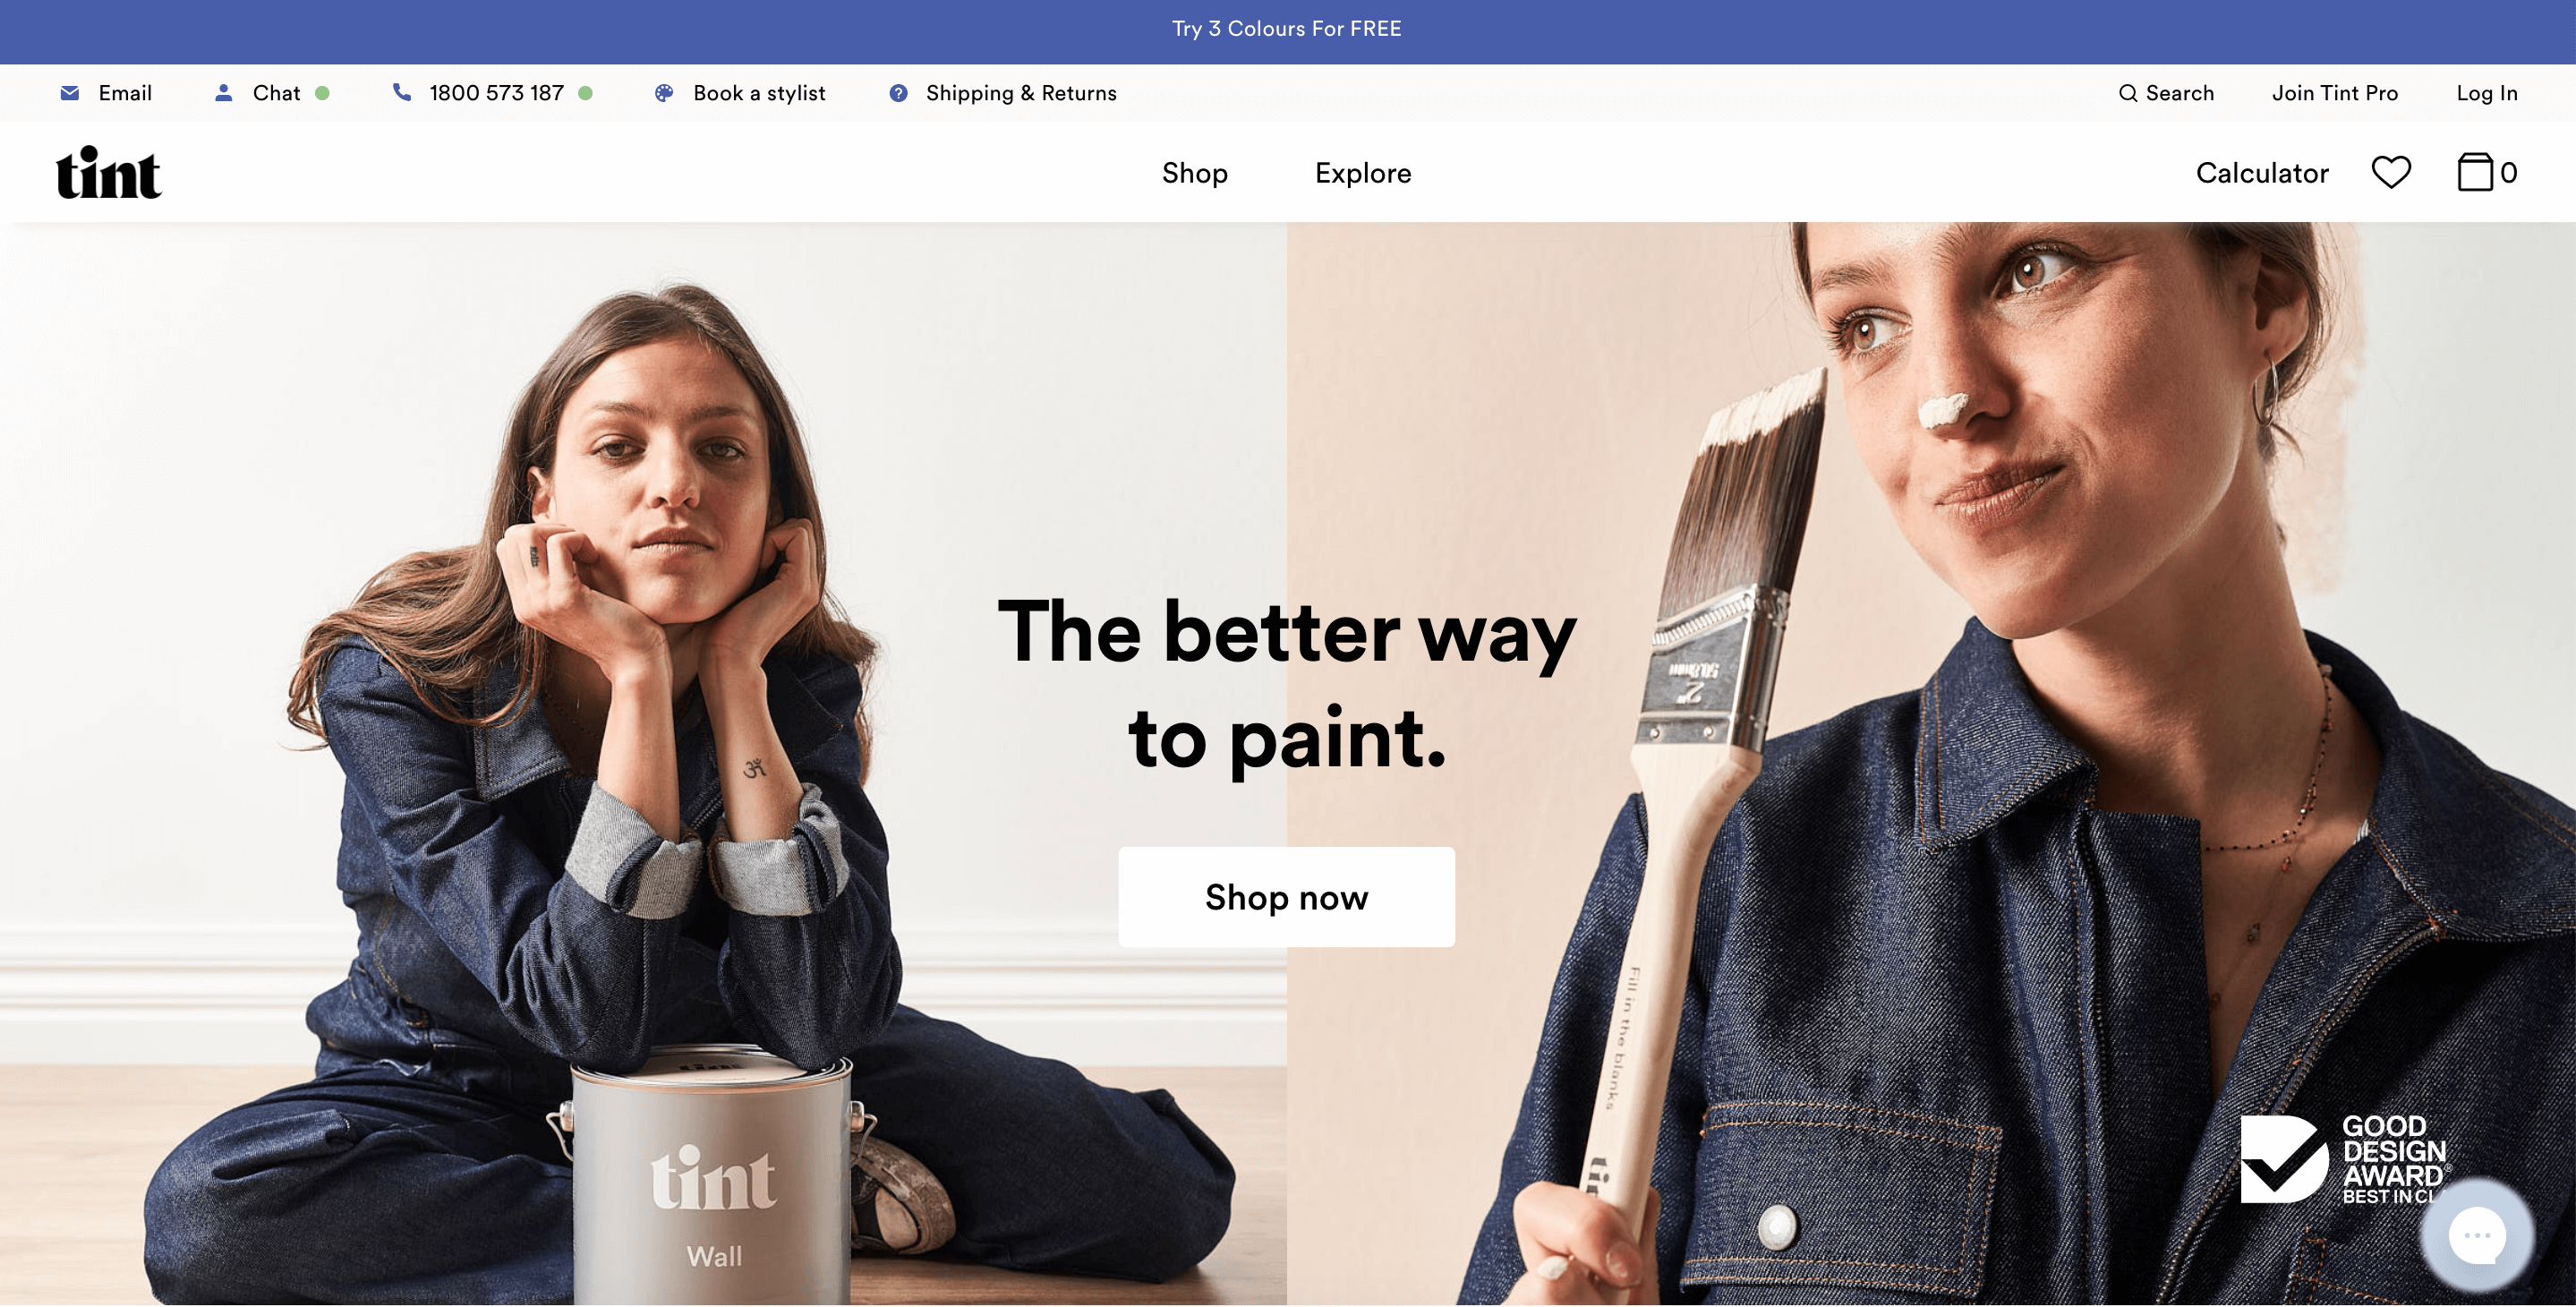 Tint, one of Start Digital's businesses to keep an eye on in 2021